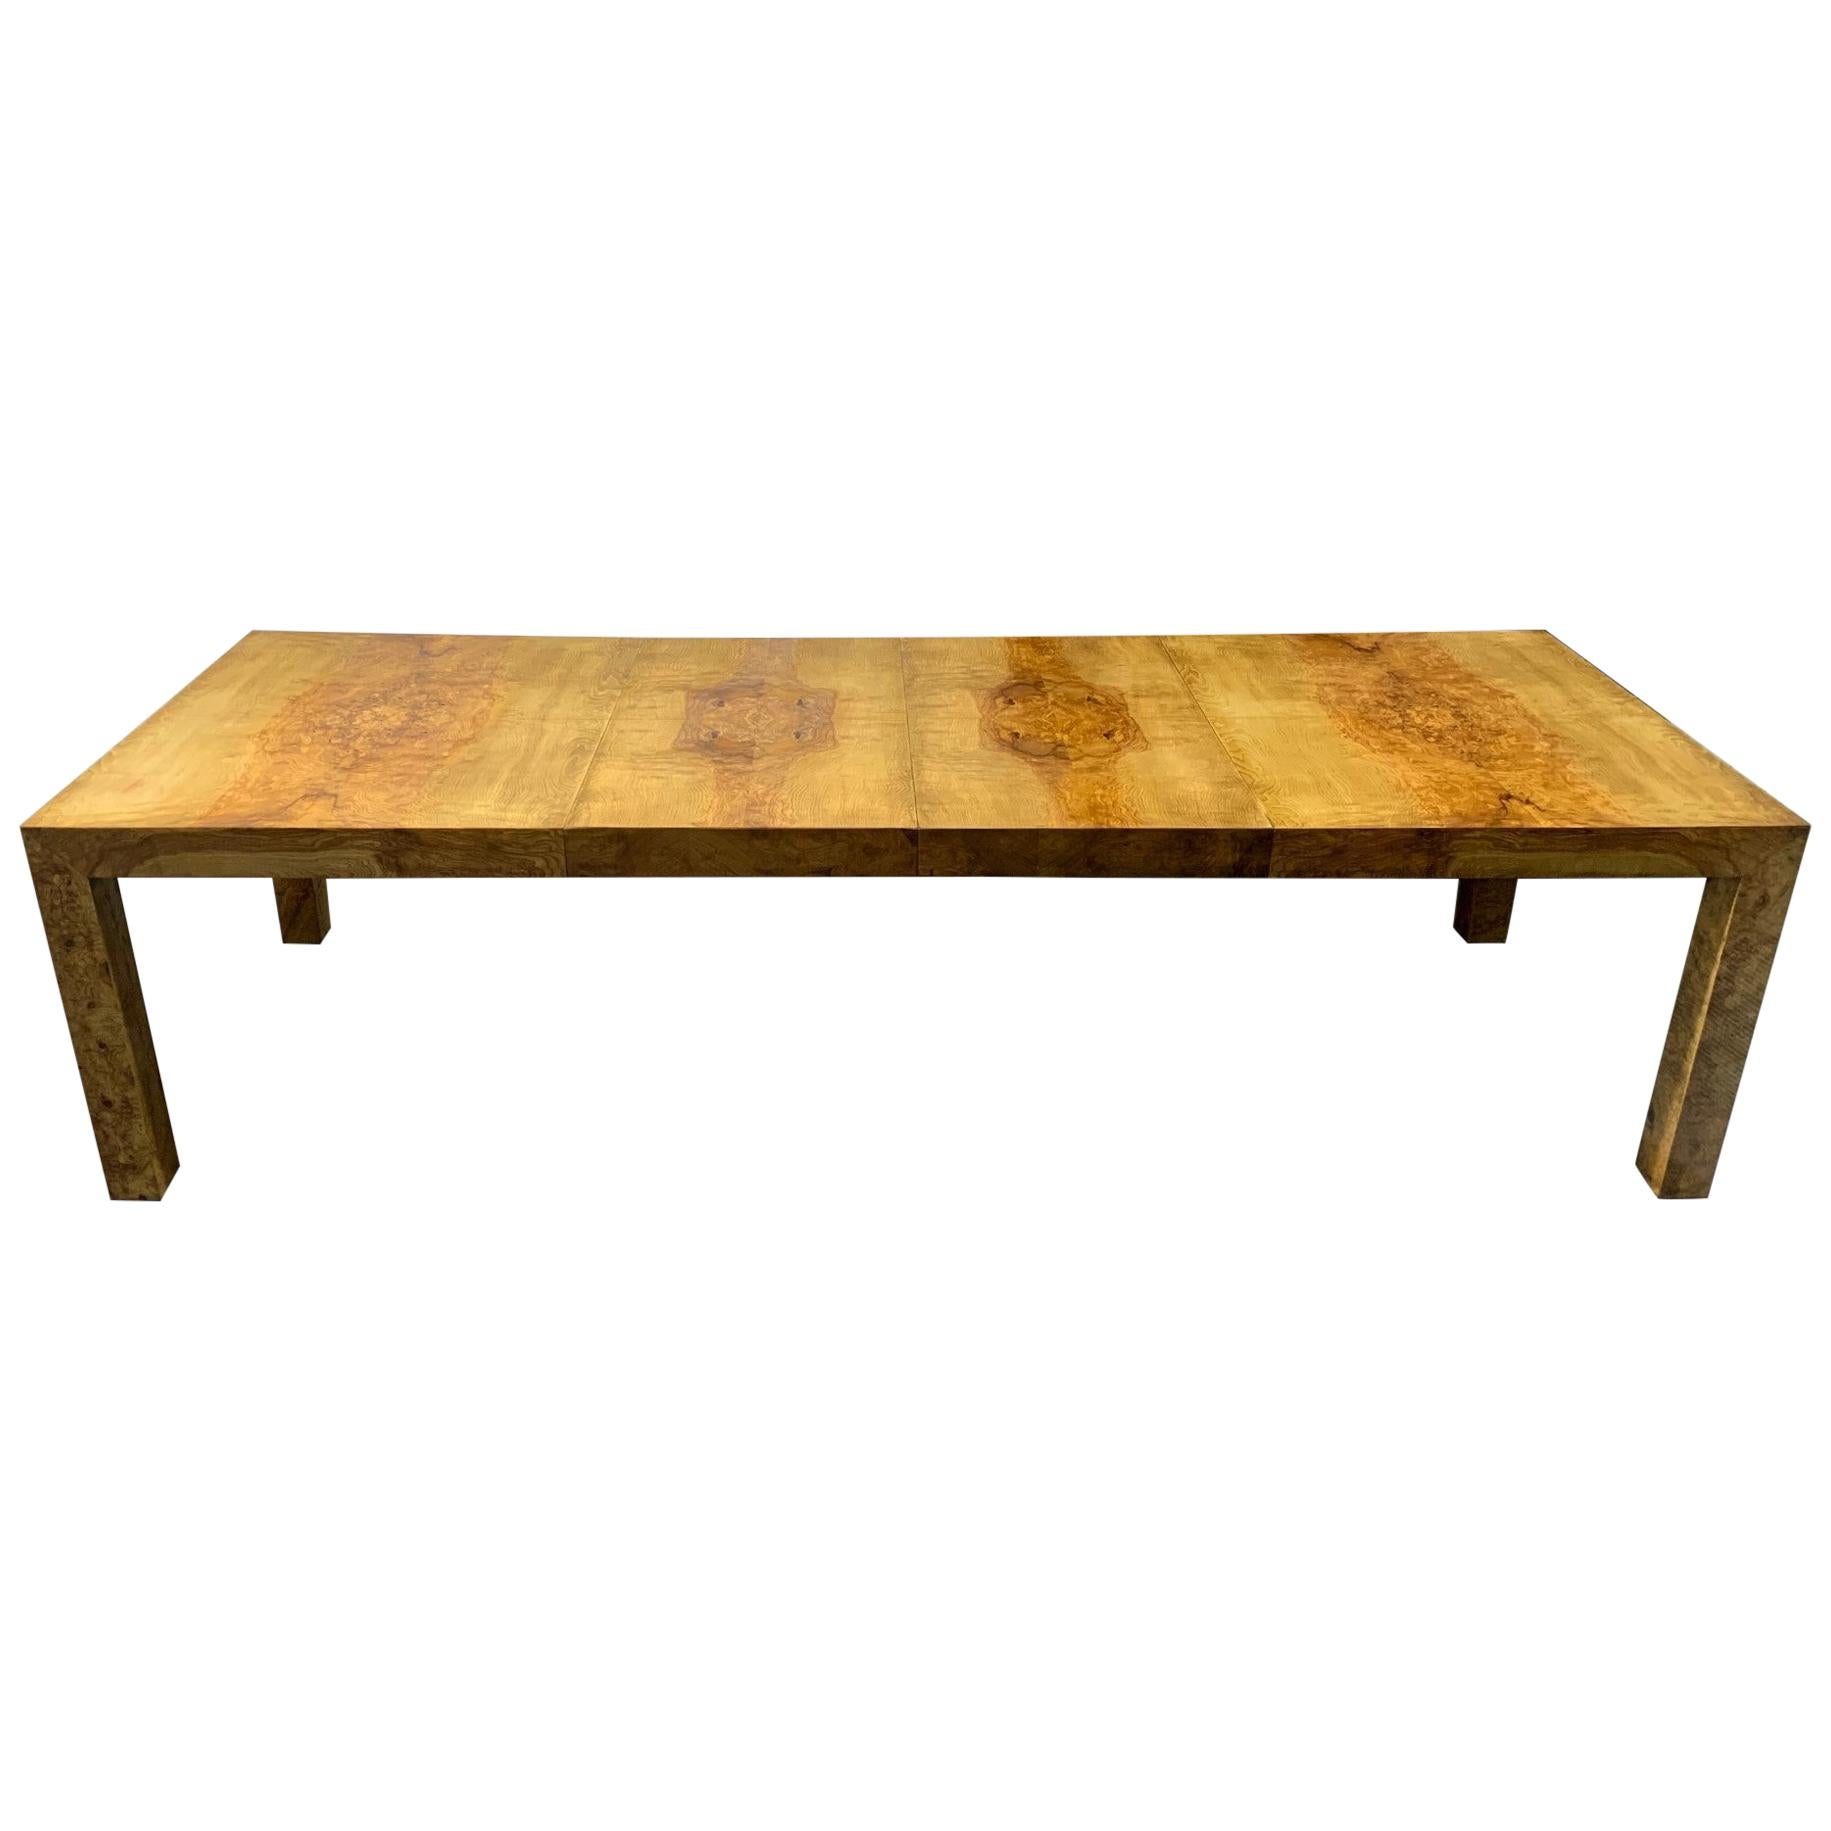 Signed Milo Baughman Burl Wood Dining Table with Two Leaves